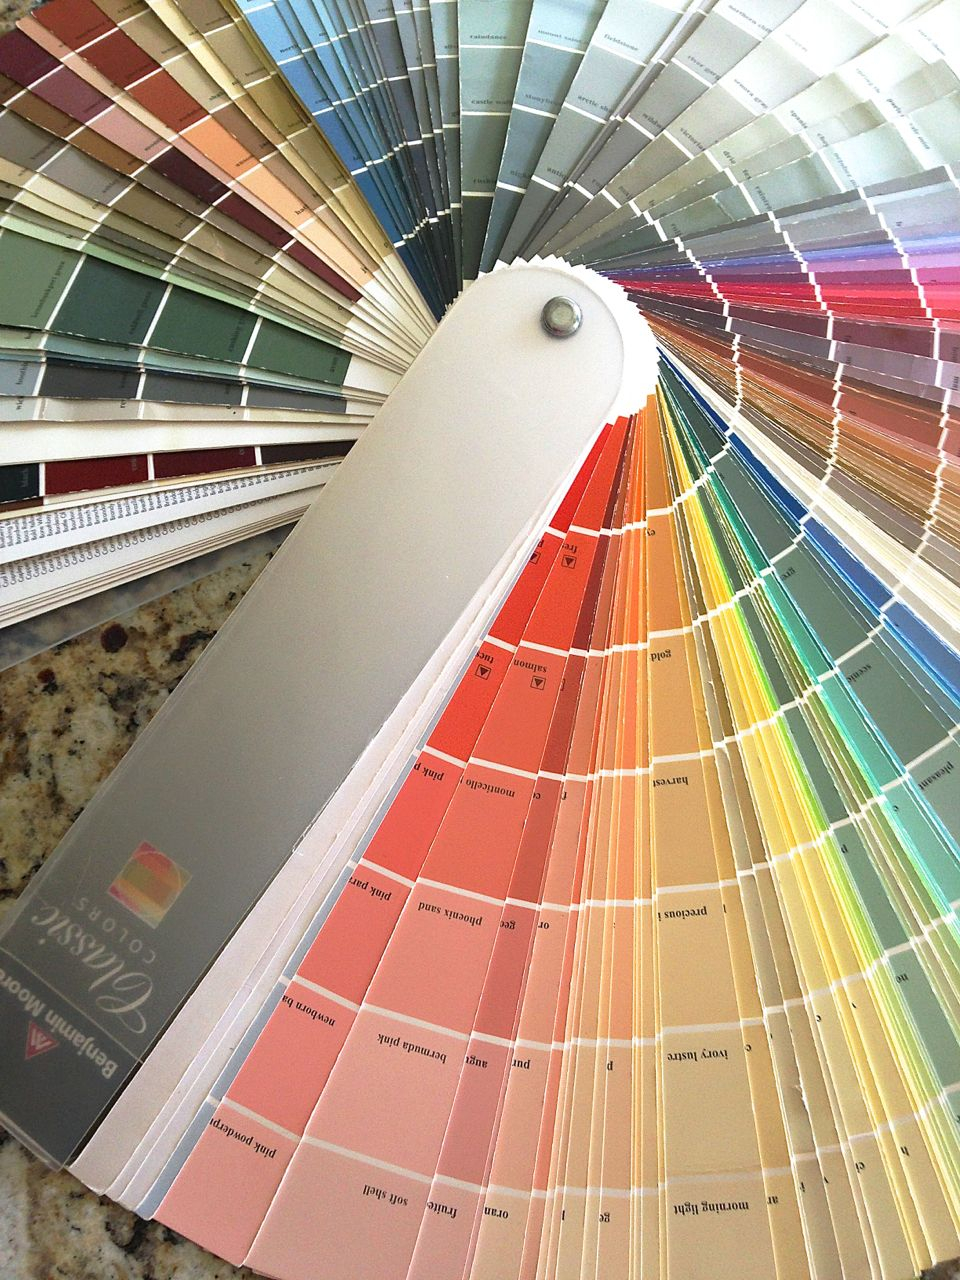 Benjamin Moore Just Has The Best Colors For A Coastal Color Scheme throughout sizing 960 X 1280